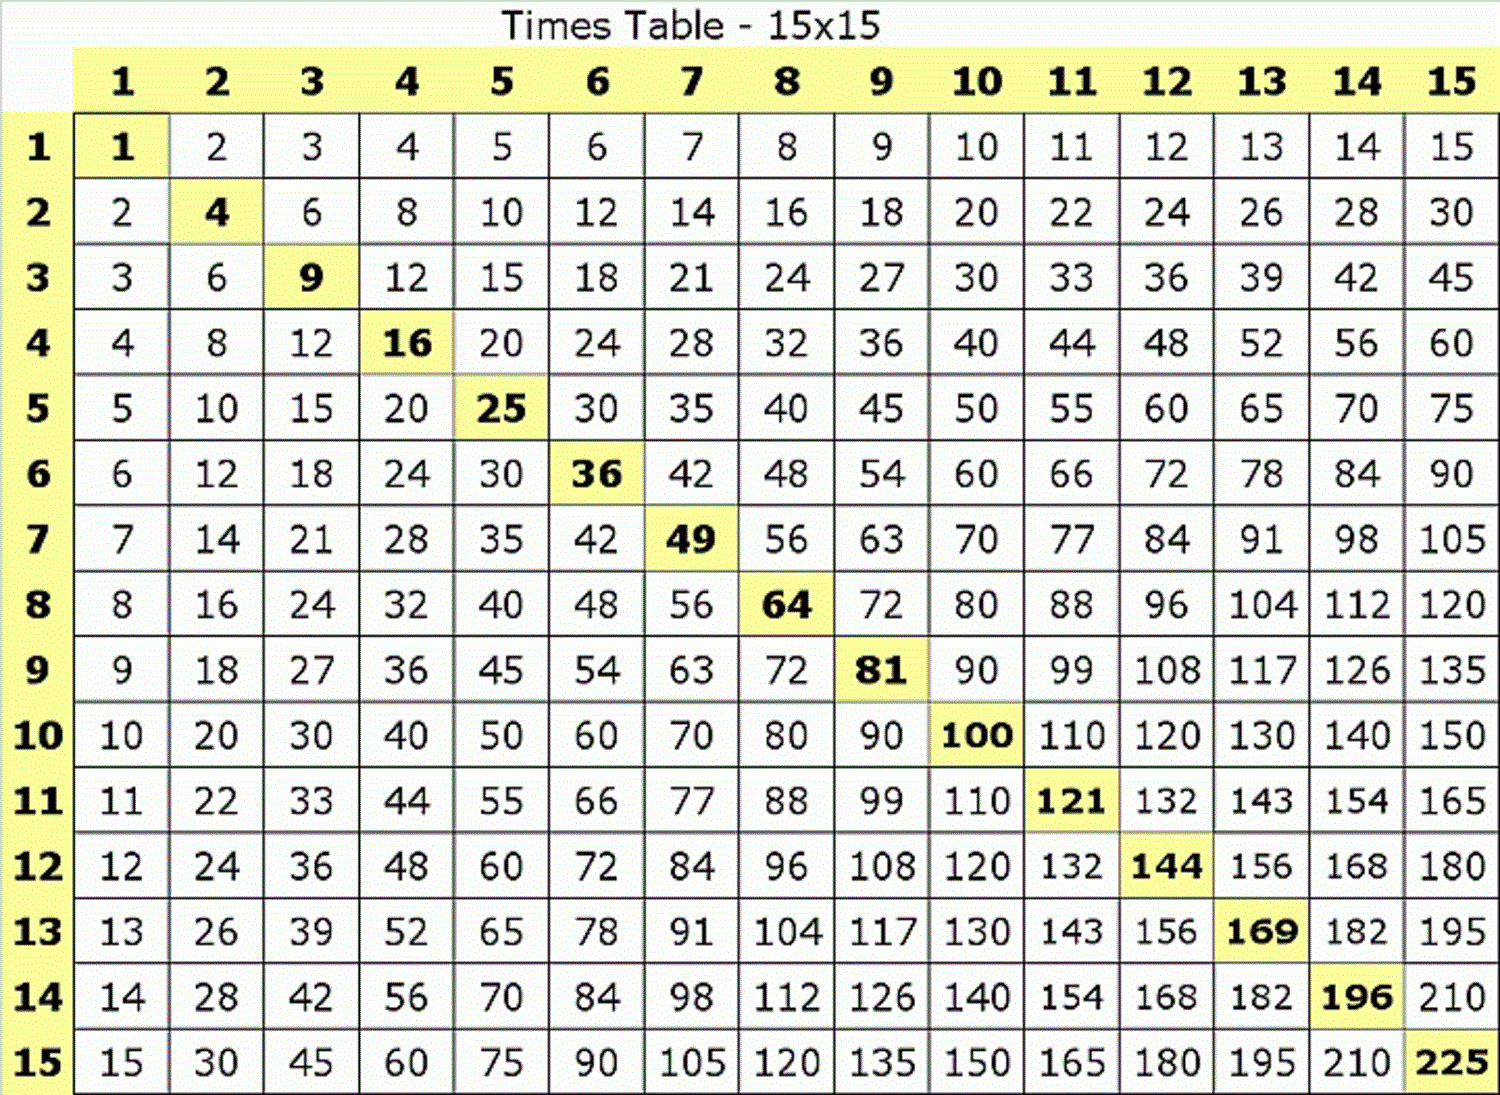 Large Multiplication Table To Train Memory | Multiplication